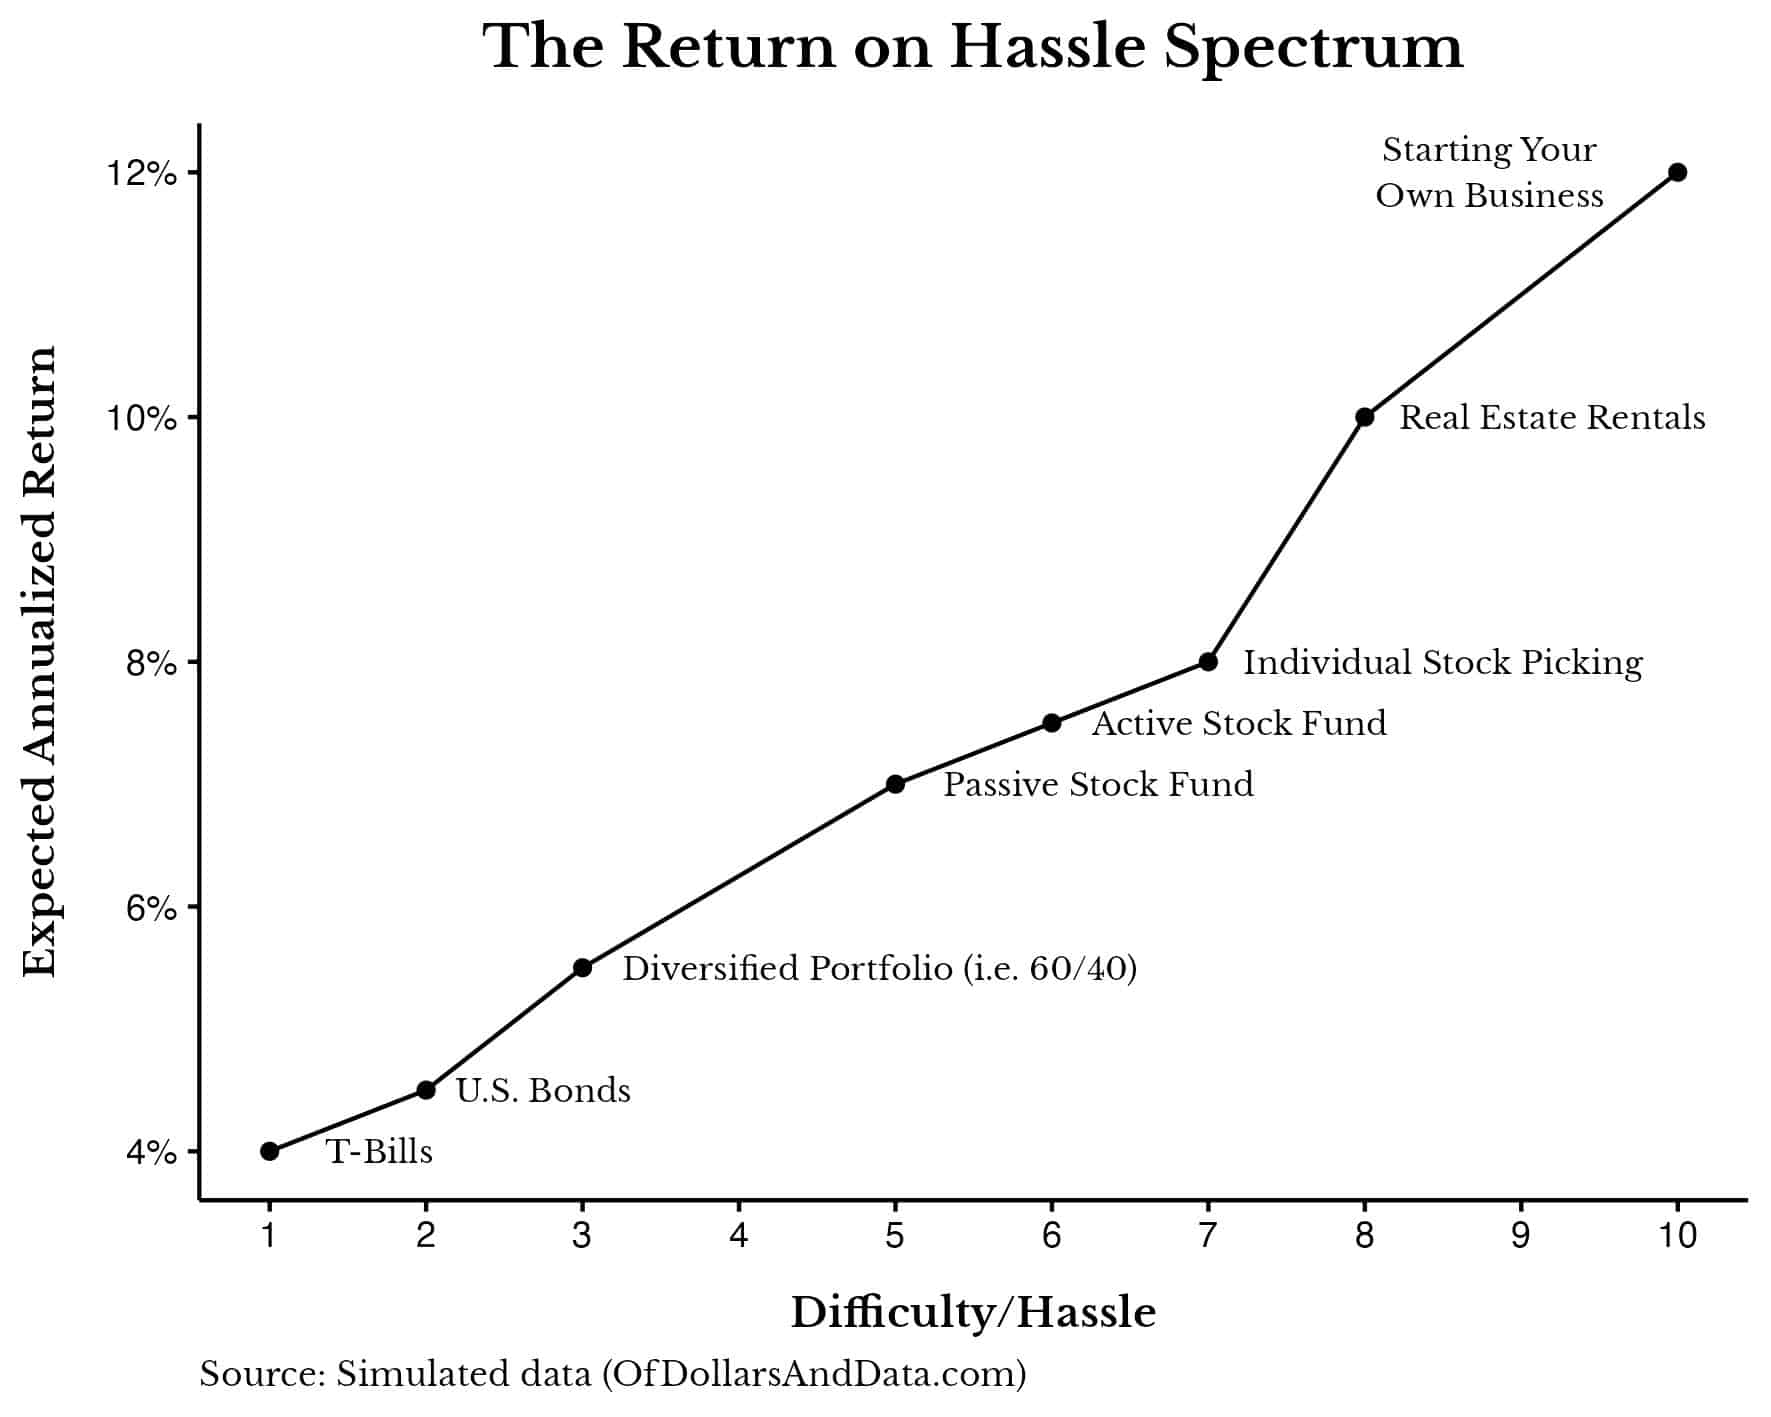 The return on hassle spectrum for a variety of different investments.